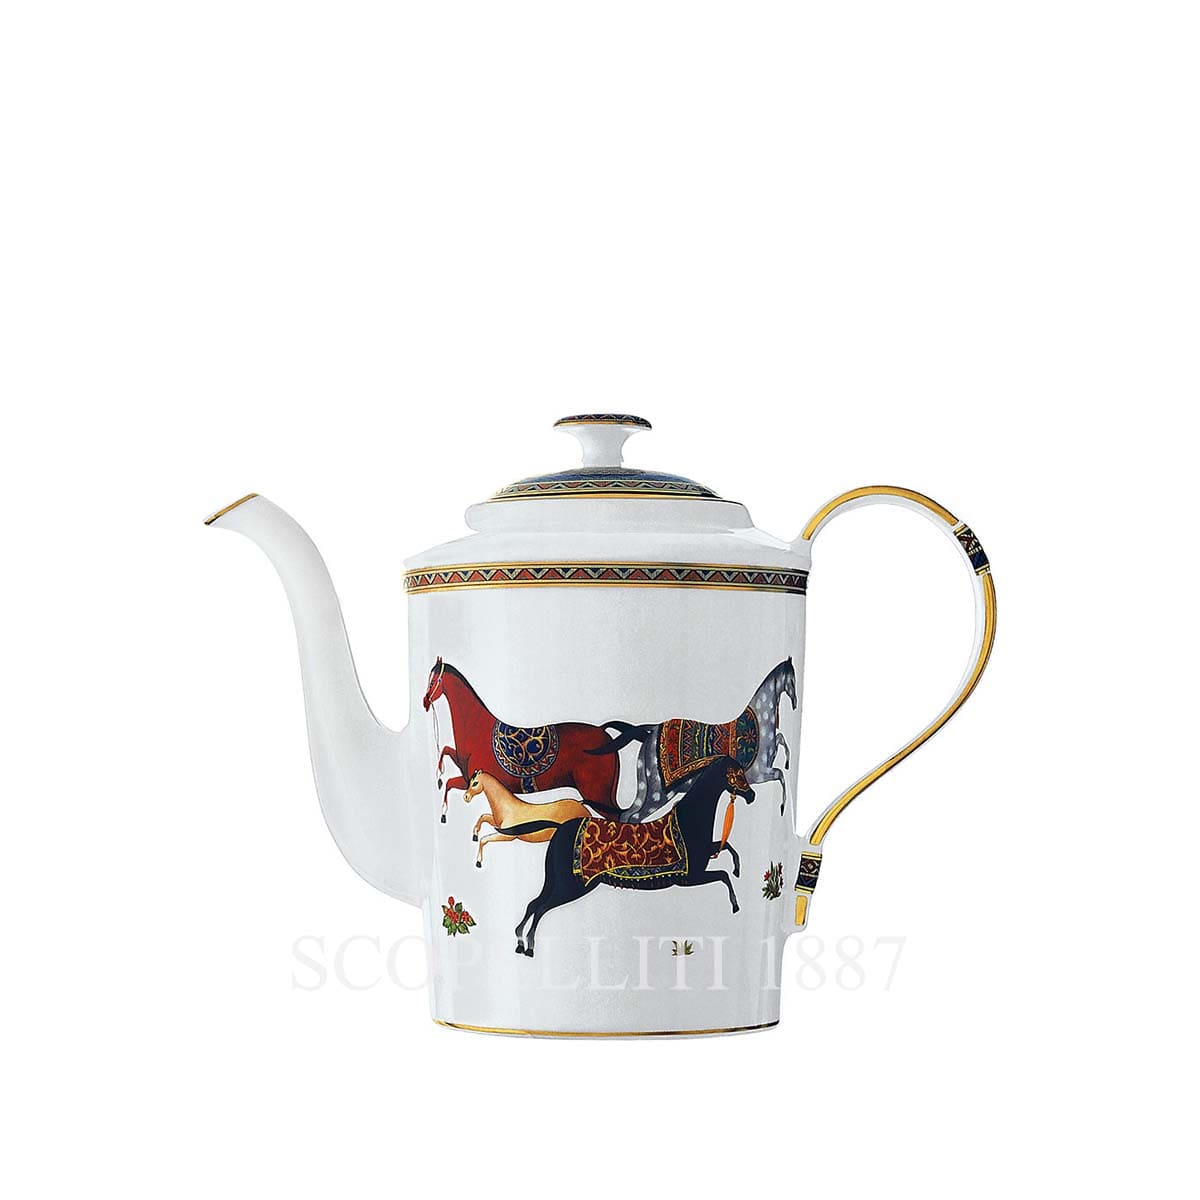 Hermes Teapot with 2 Tea Cups Gift Set Cheval d'Orient